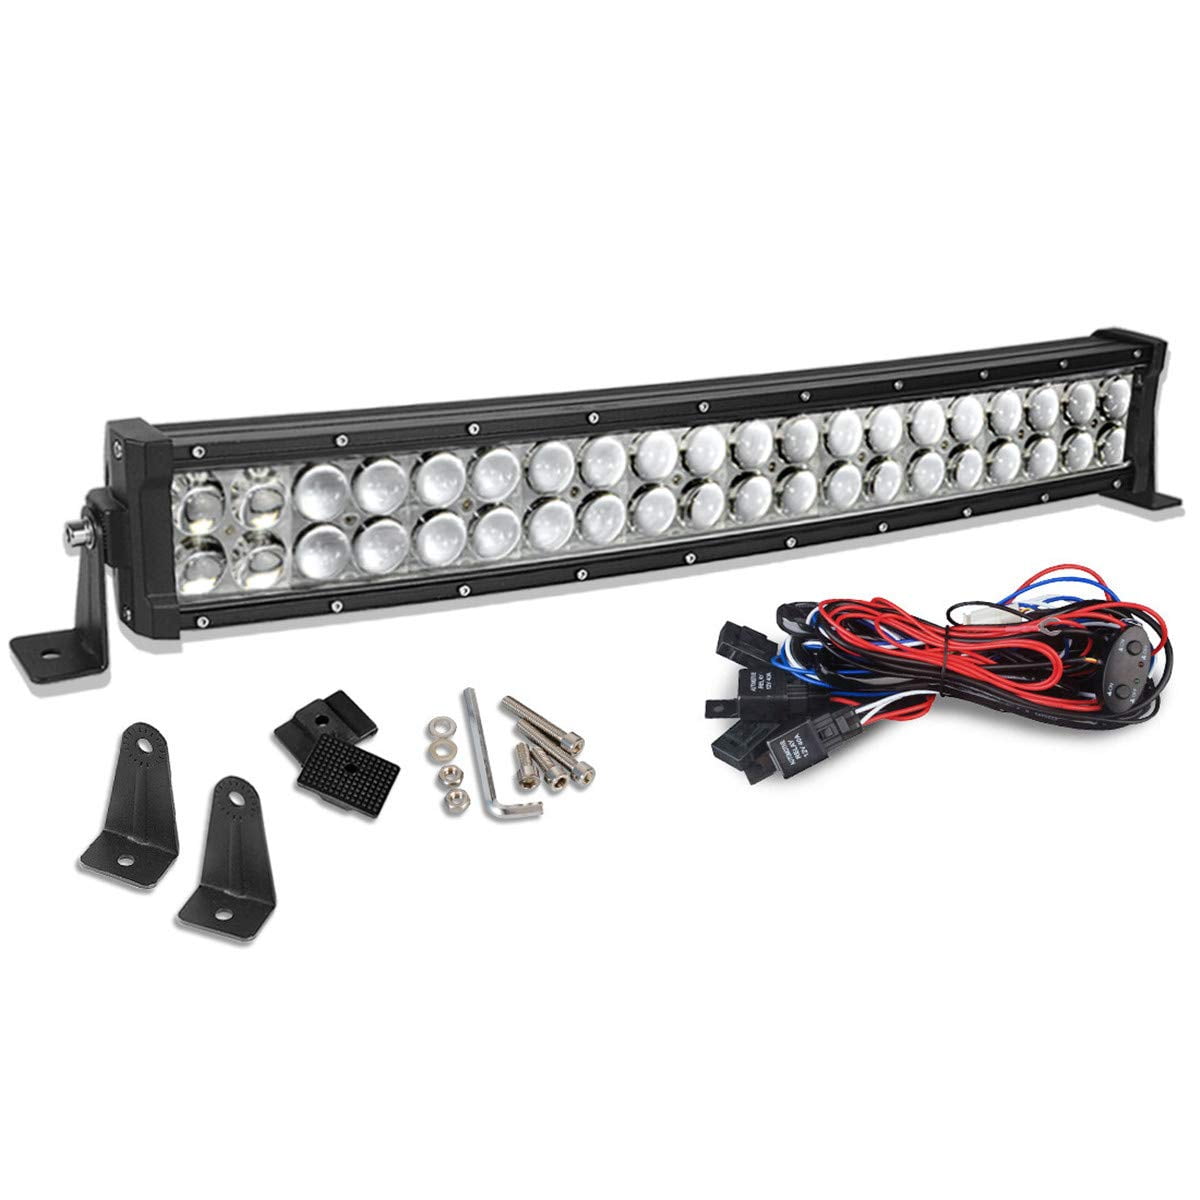 52INCH 300W LED LIGHT BAR CURVED DRIVING COMBO OFFROAD 4WD TRUCK Spot FLOOD LAMP